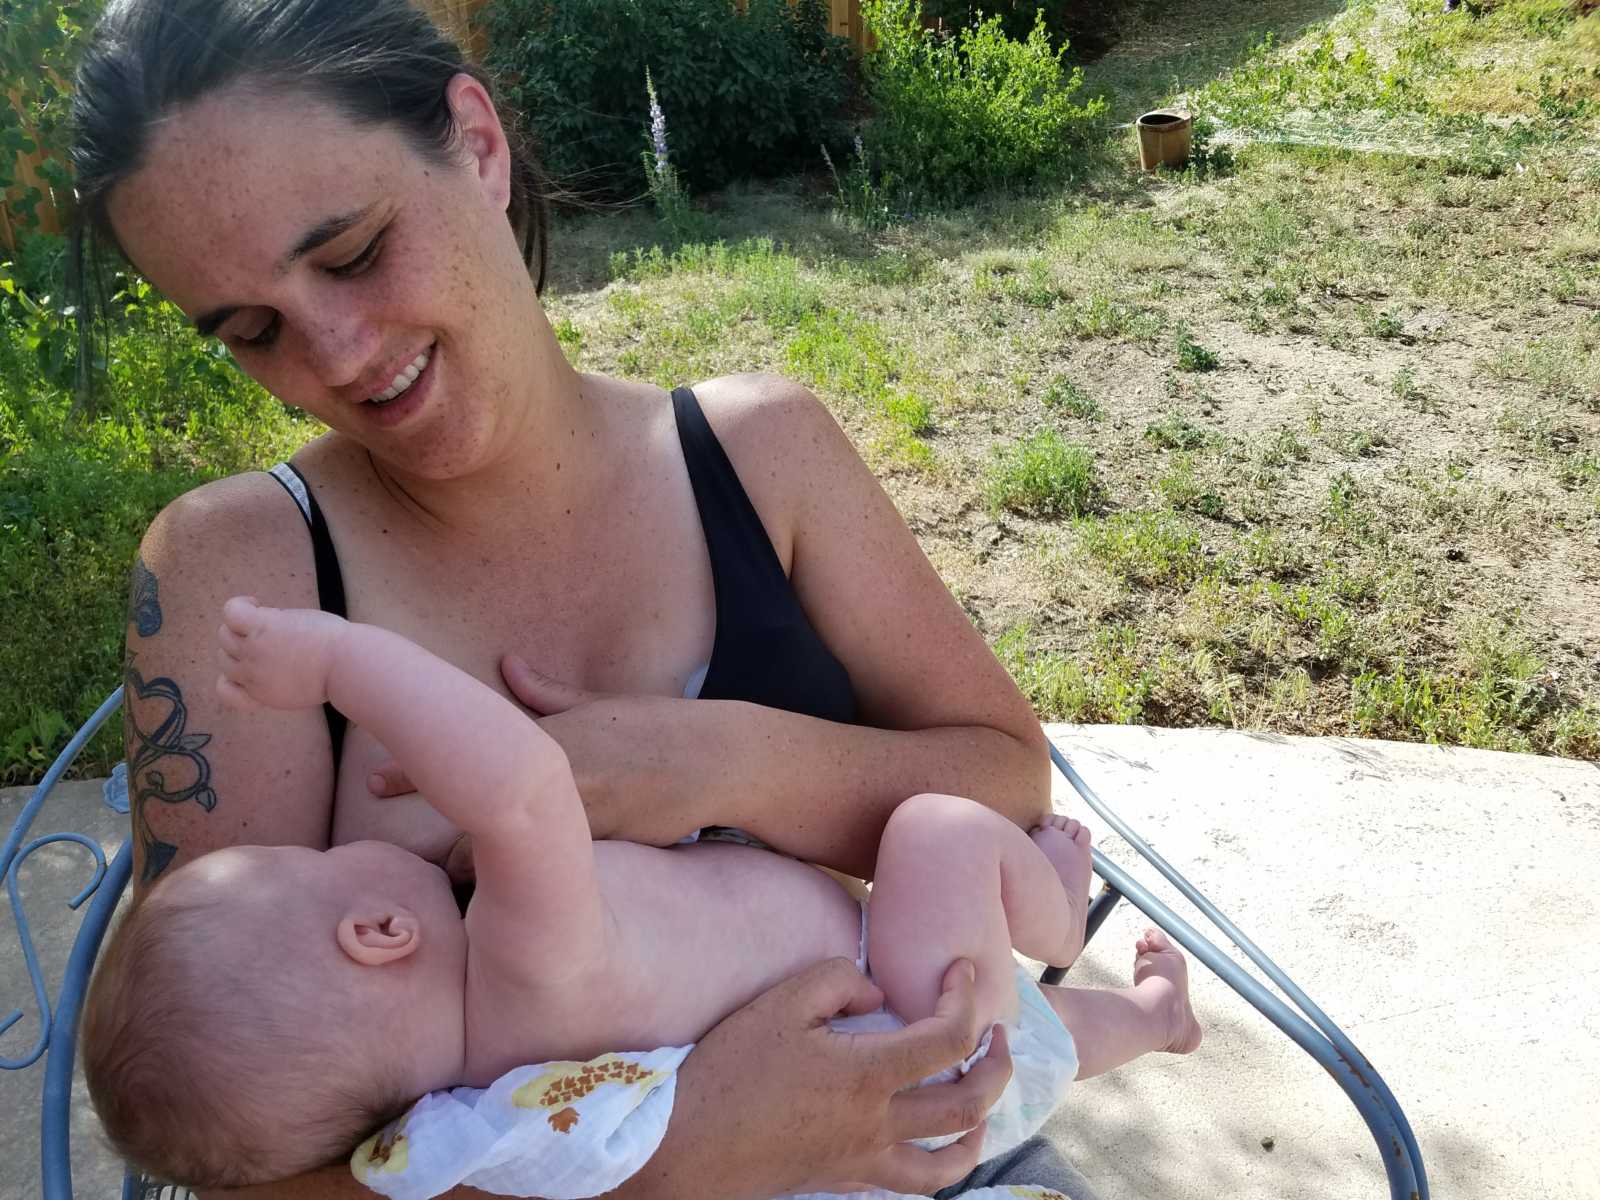 Woman looks down at baby smiling while baby breastfeeds